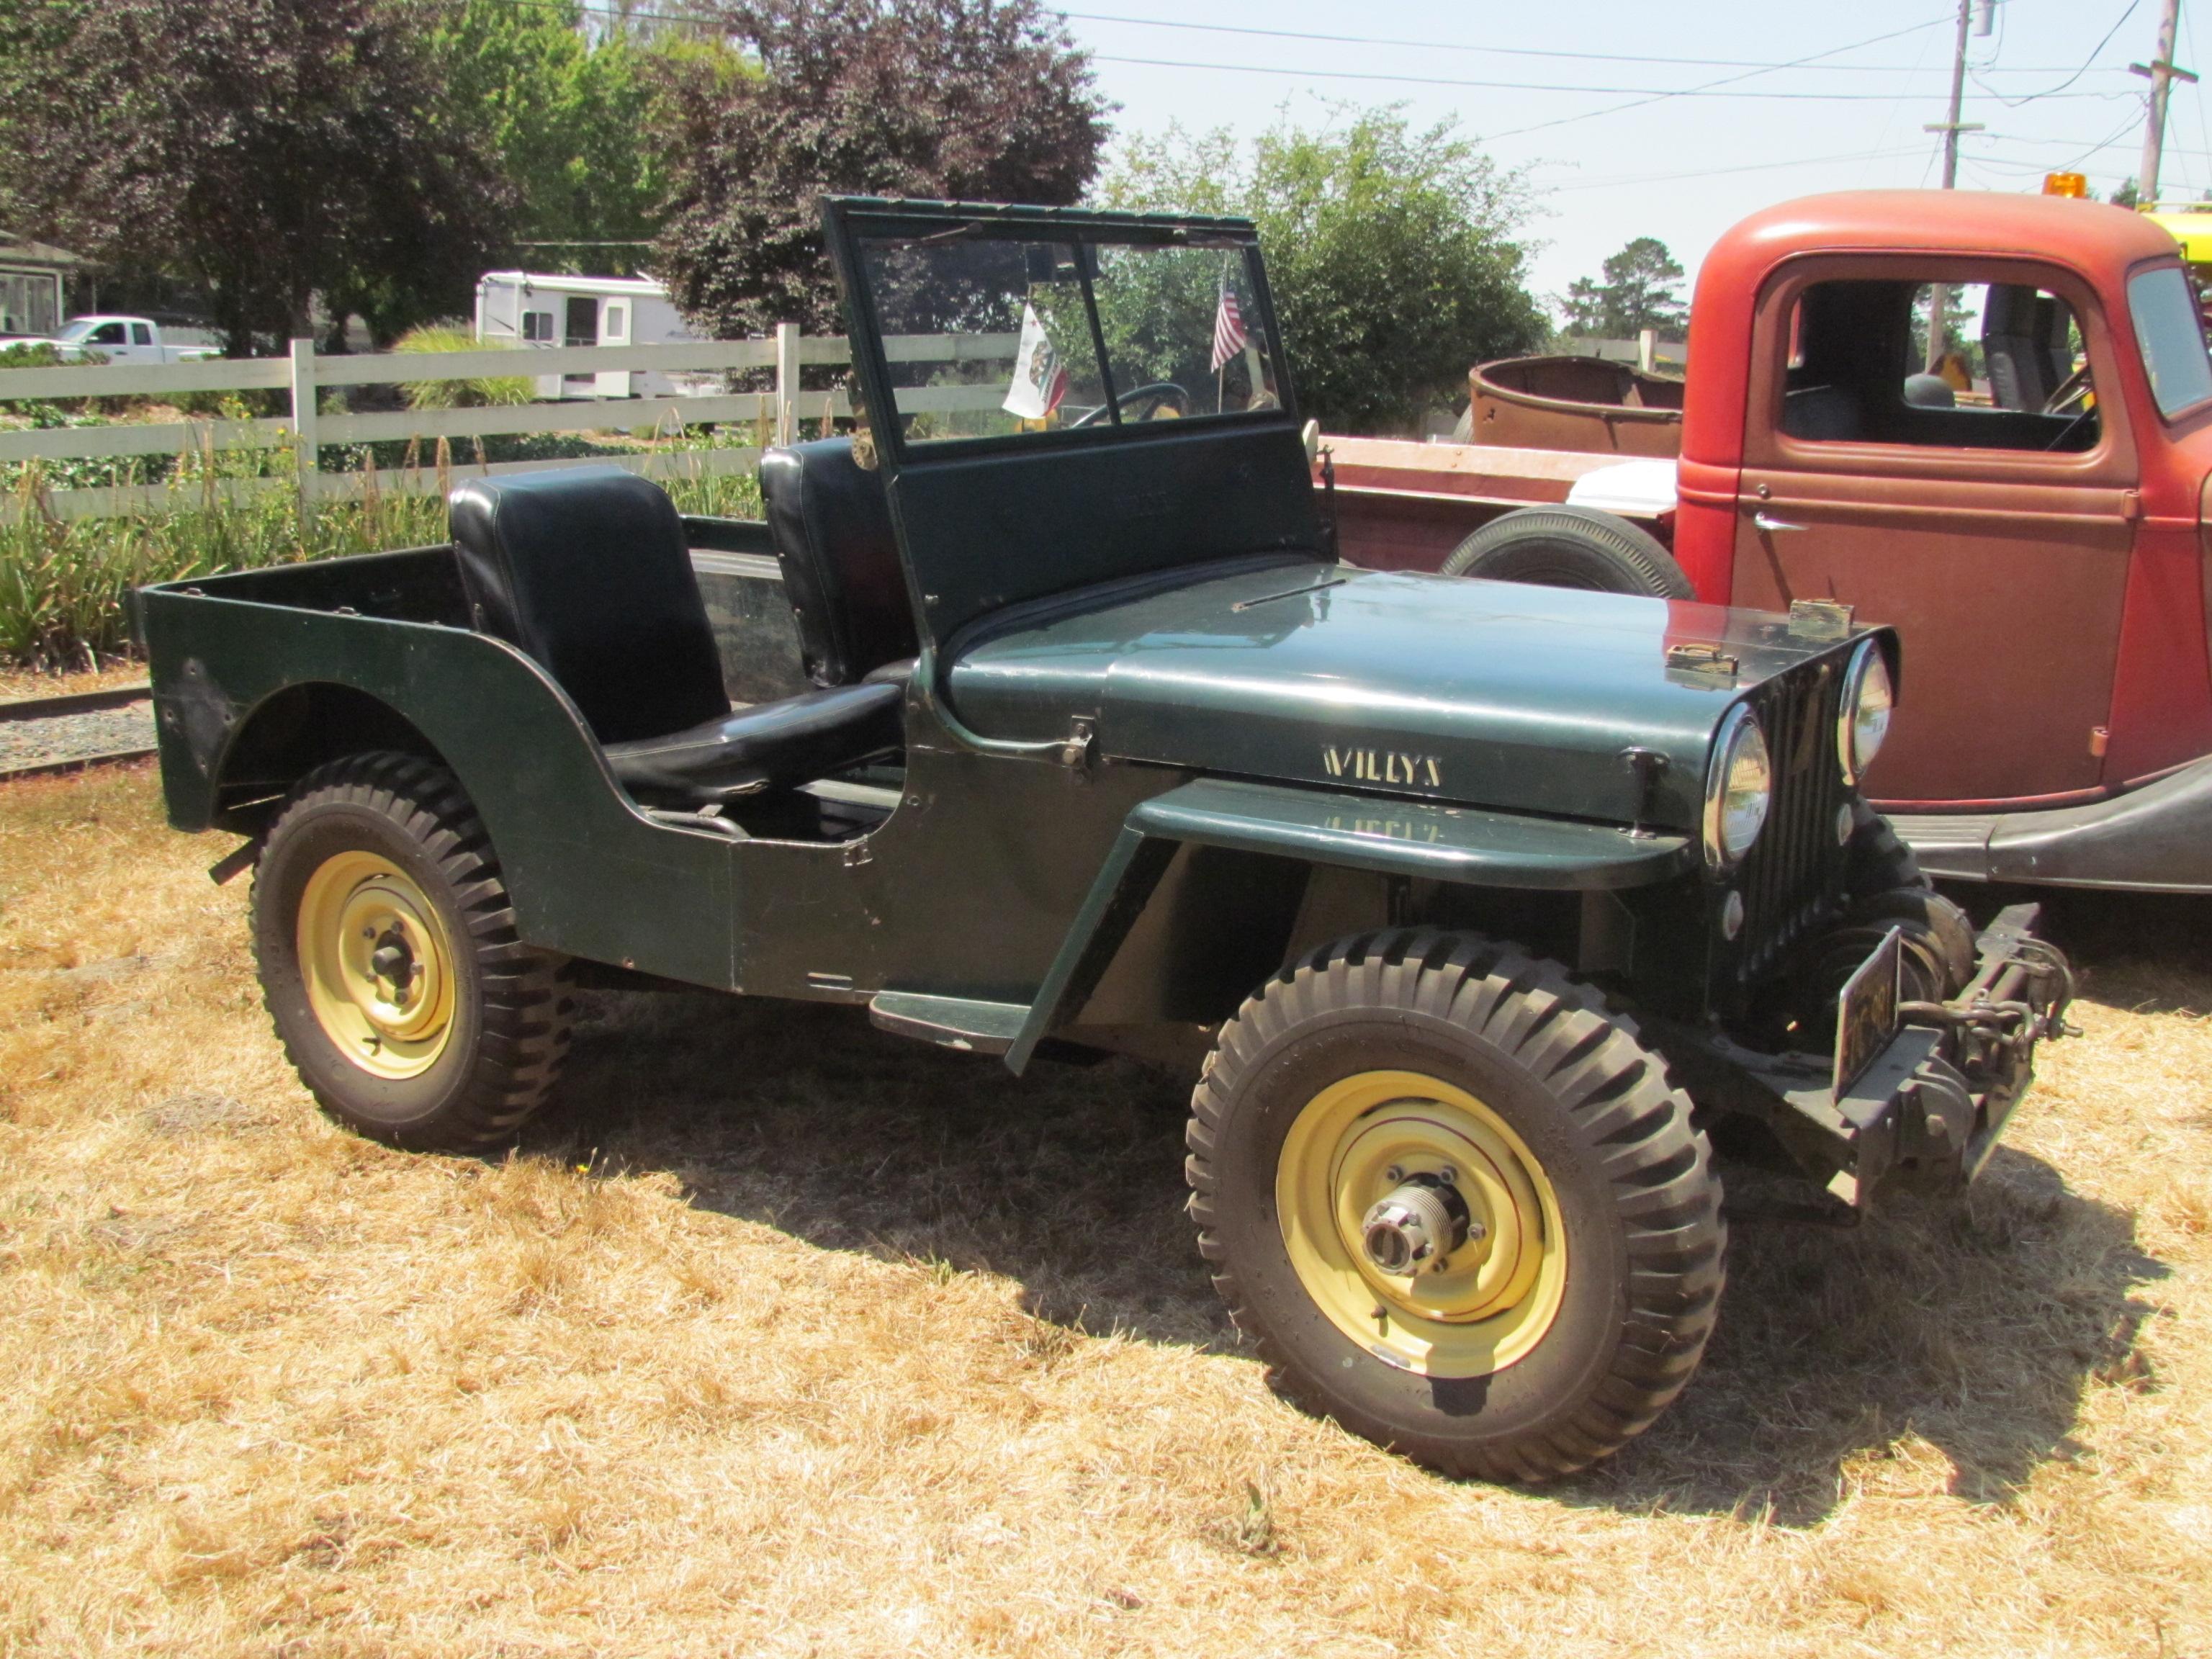 History and Evolution of the Jeep CJ